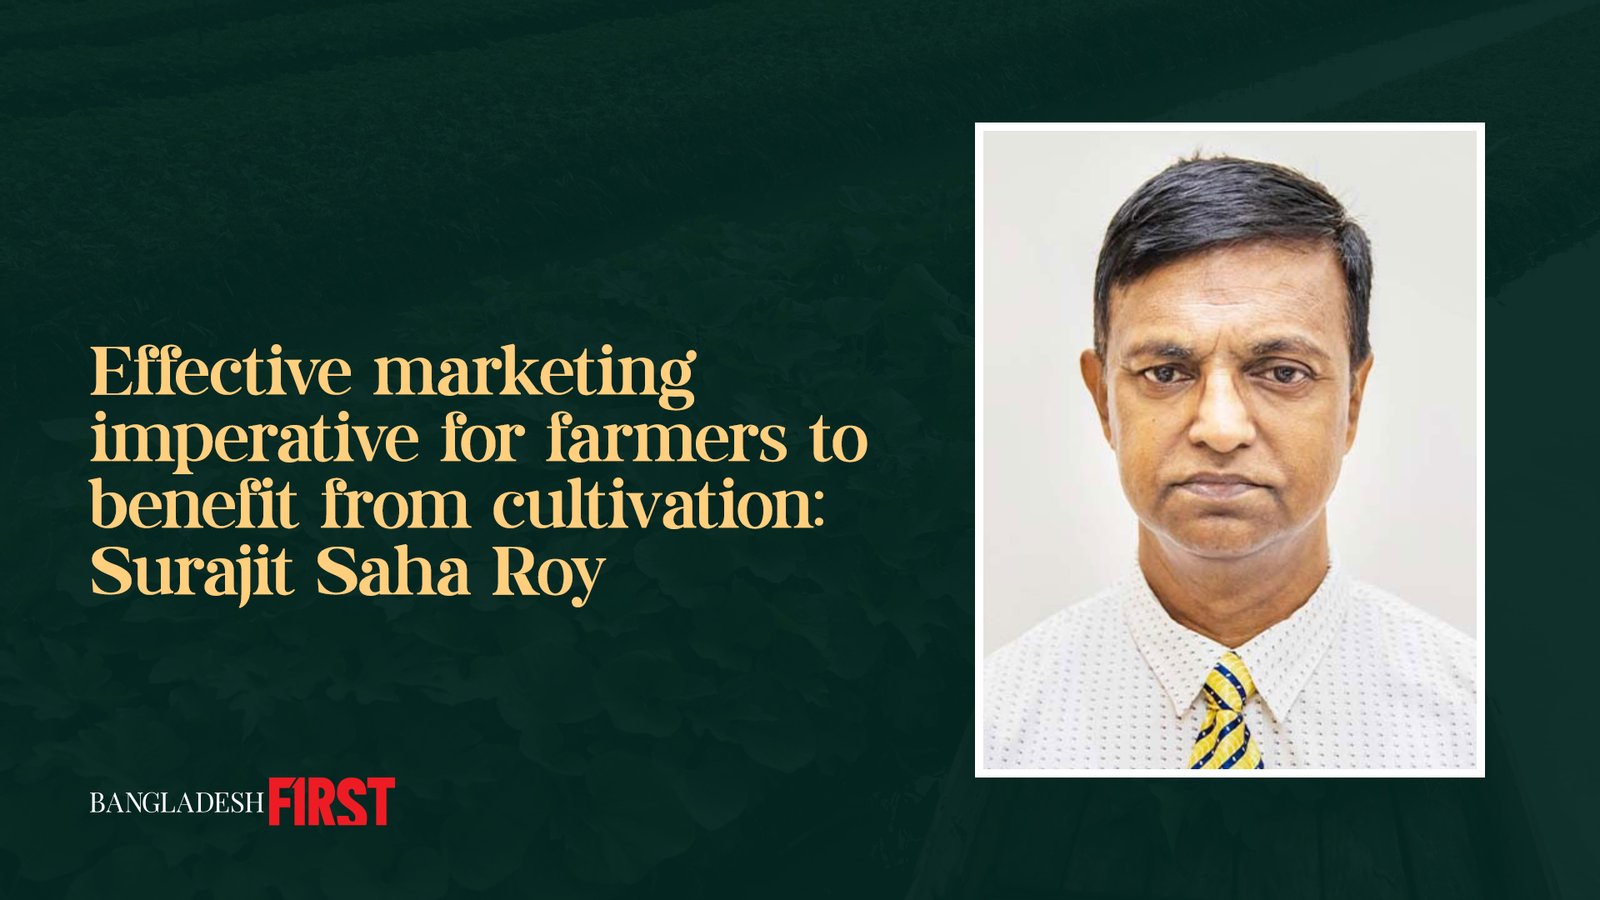 Effective marketing imperative for farmers to benefit from cultivation: Surajit Saha Roy